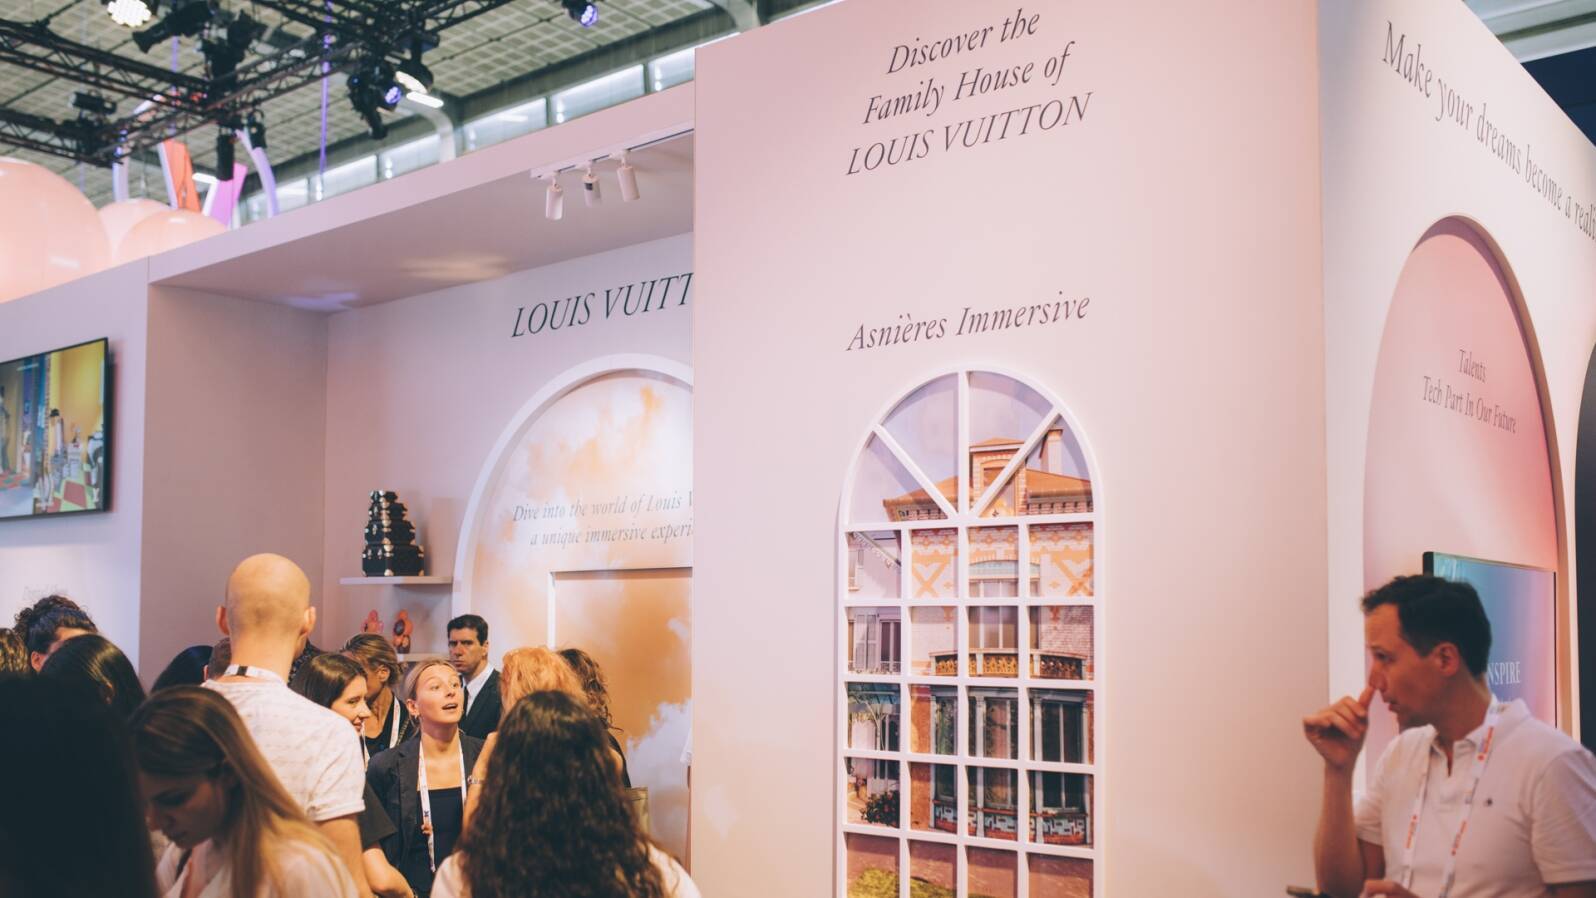 The LVMH Innovation Award is Still On, Despite the global upheaval  triggered by the Covid-19 crisis and subsequent cancellation of Viva  Technology, the LVMH Group is more determined than ever